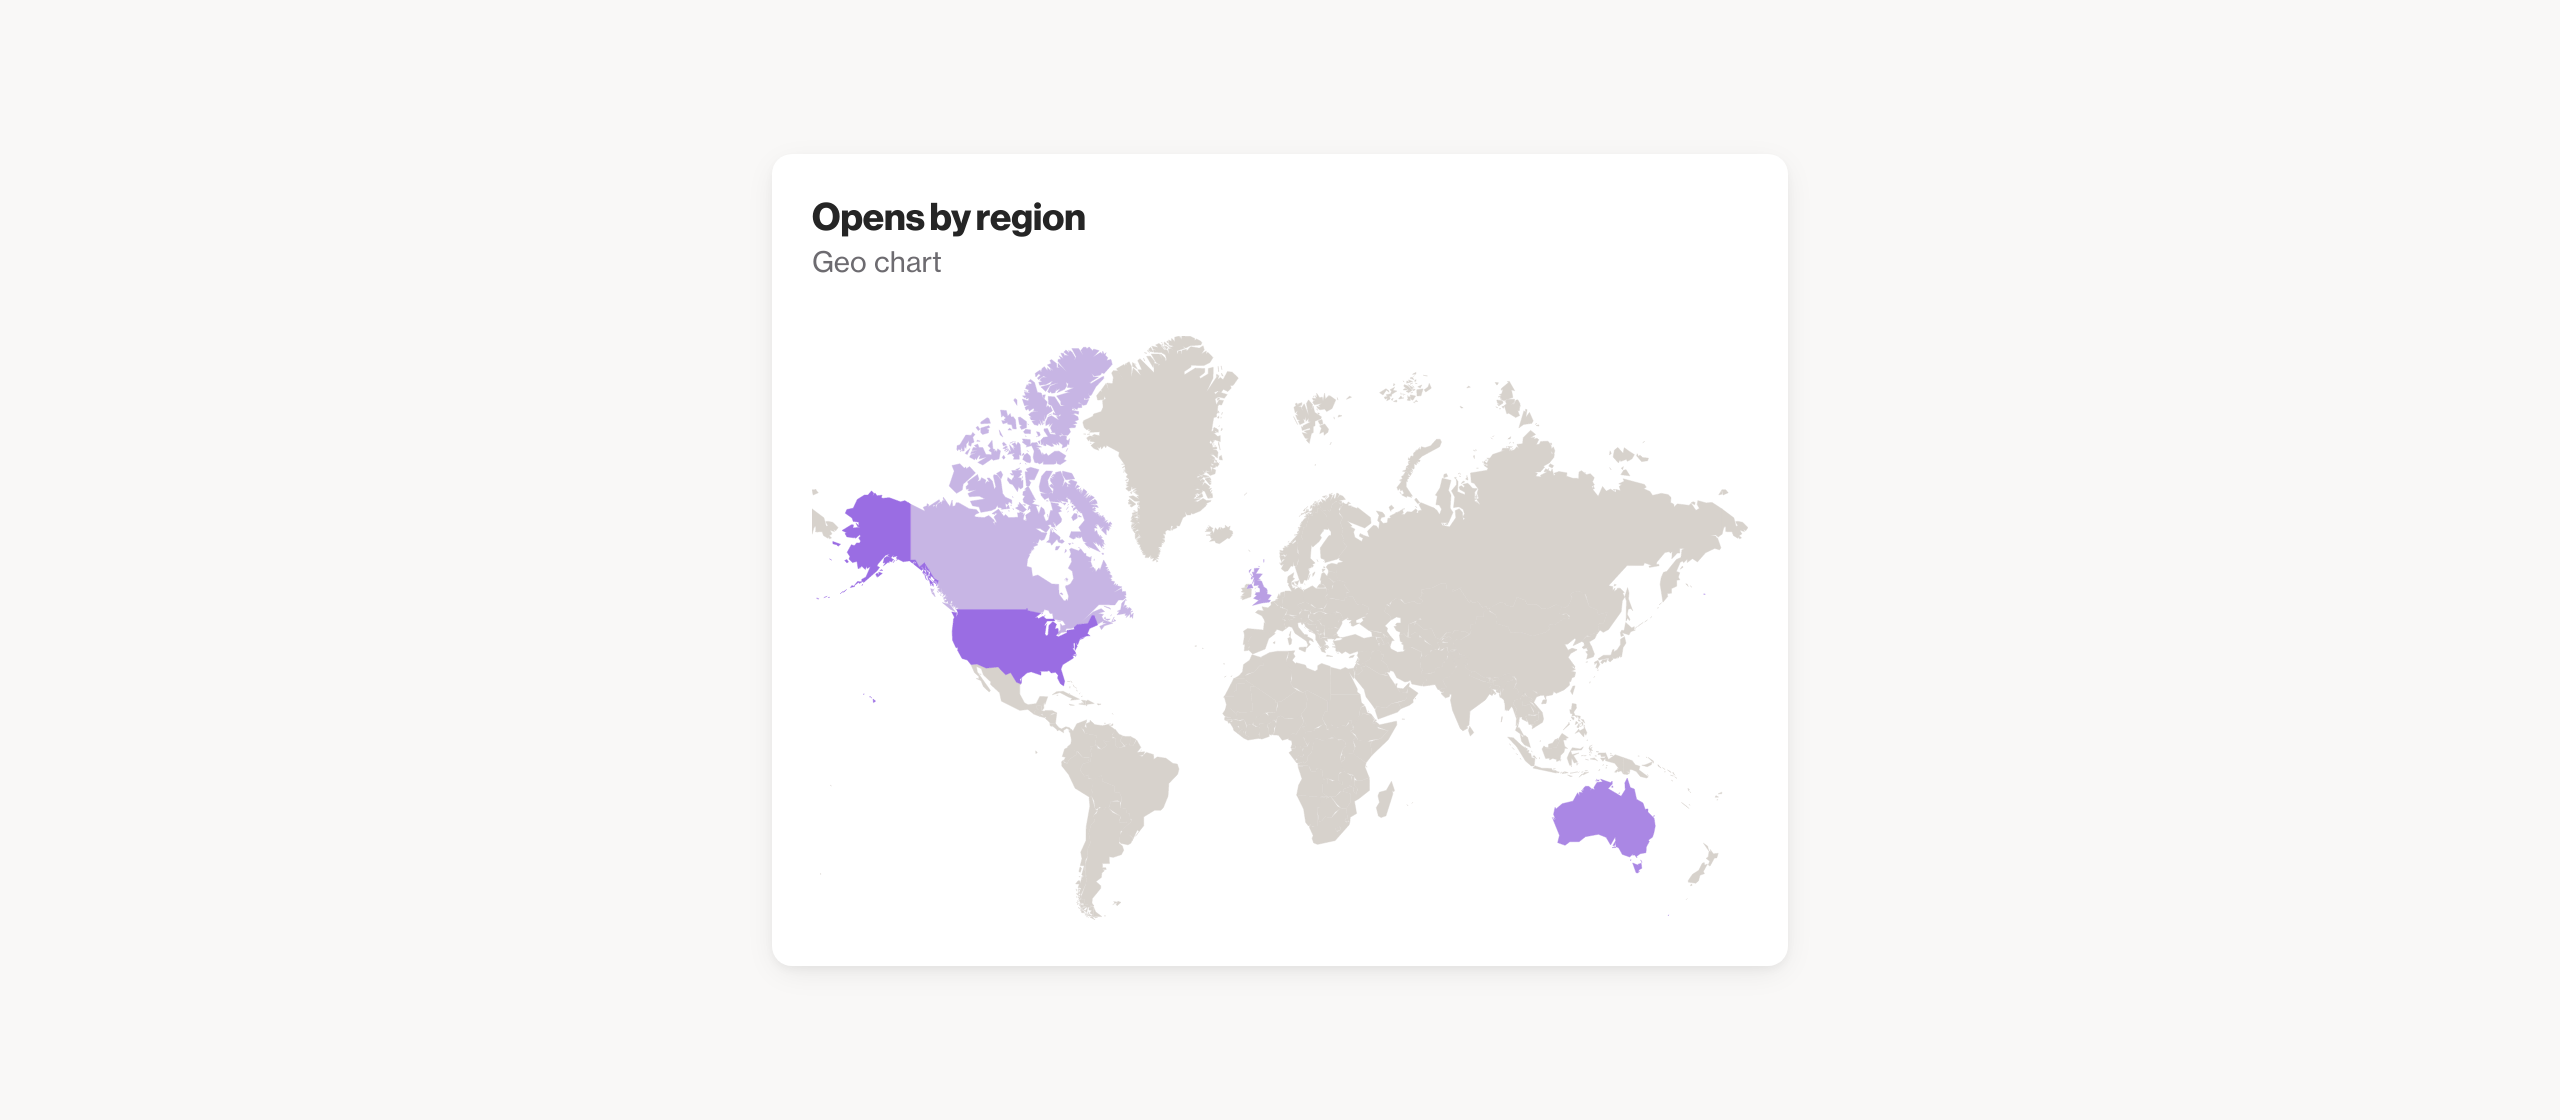 Email opens by region